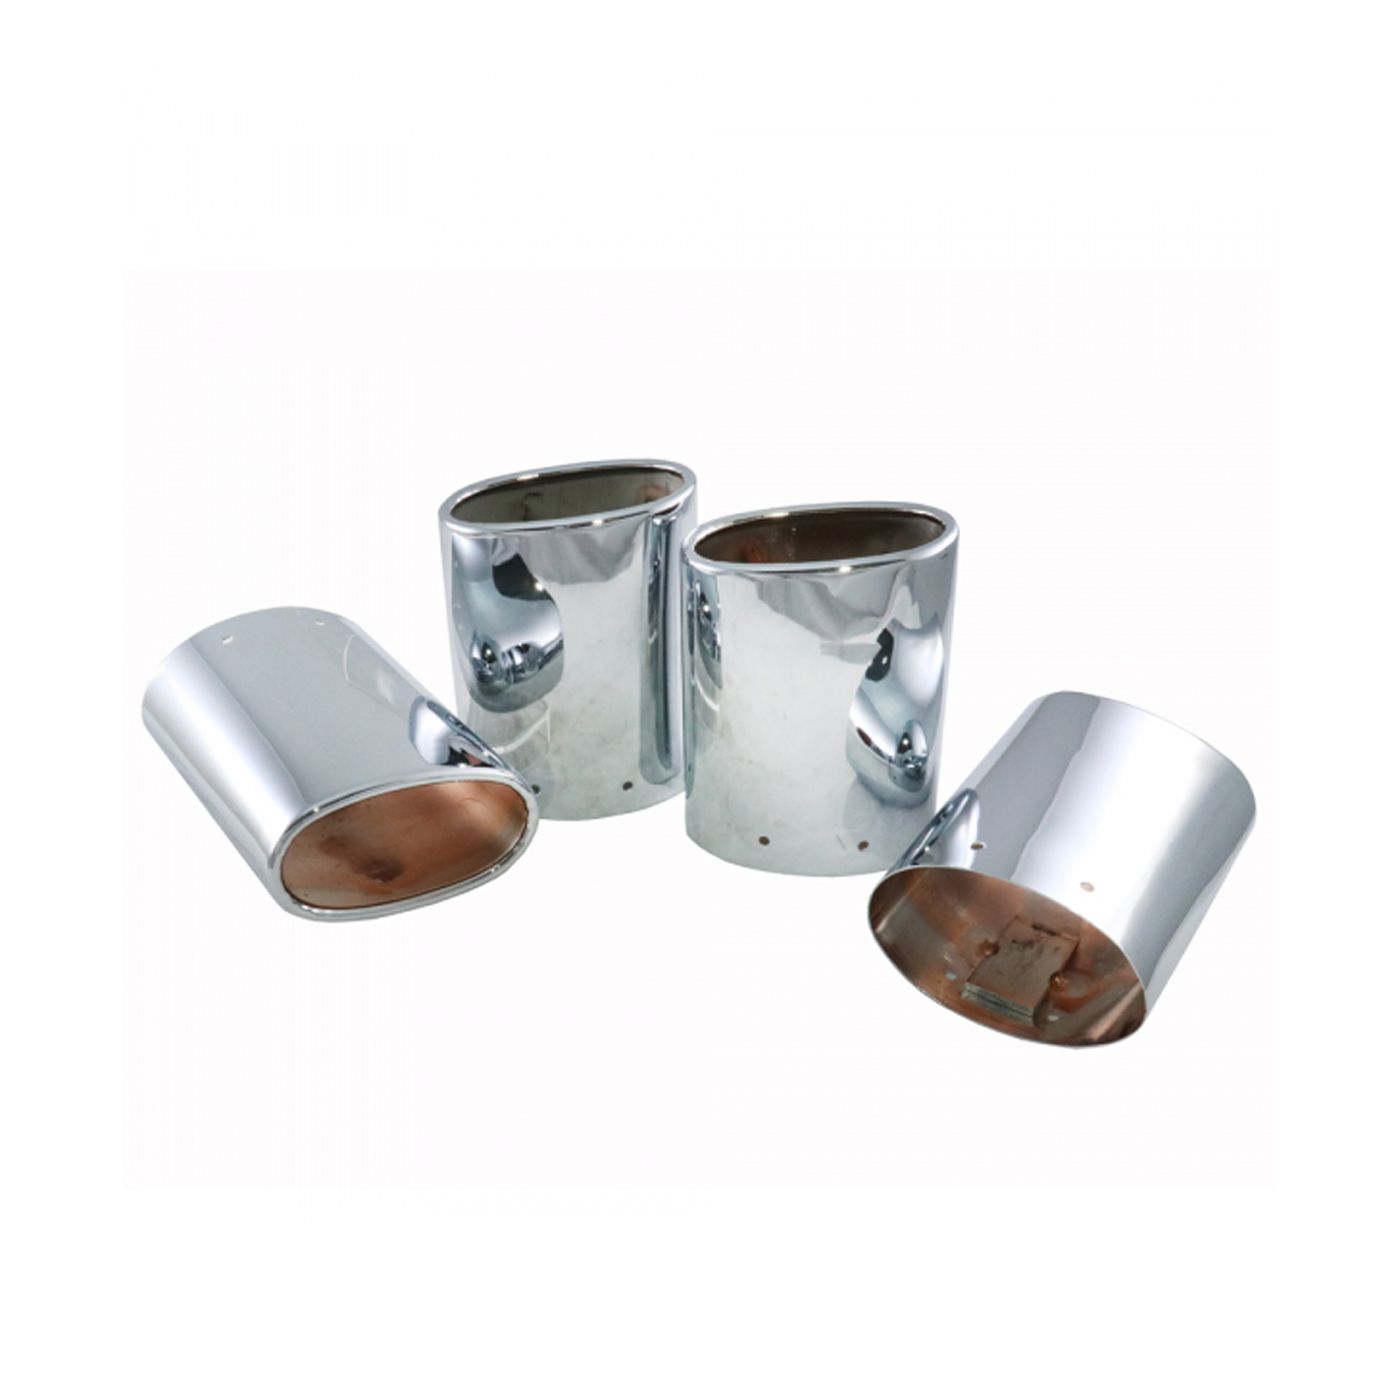 C5 Corvette 97-00 Chrome Plated Stainless Exhaust Tips, Set of 4